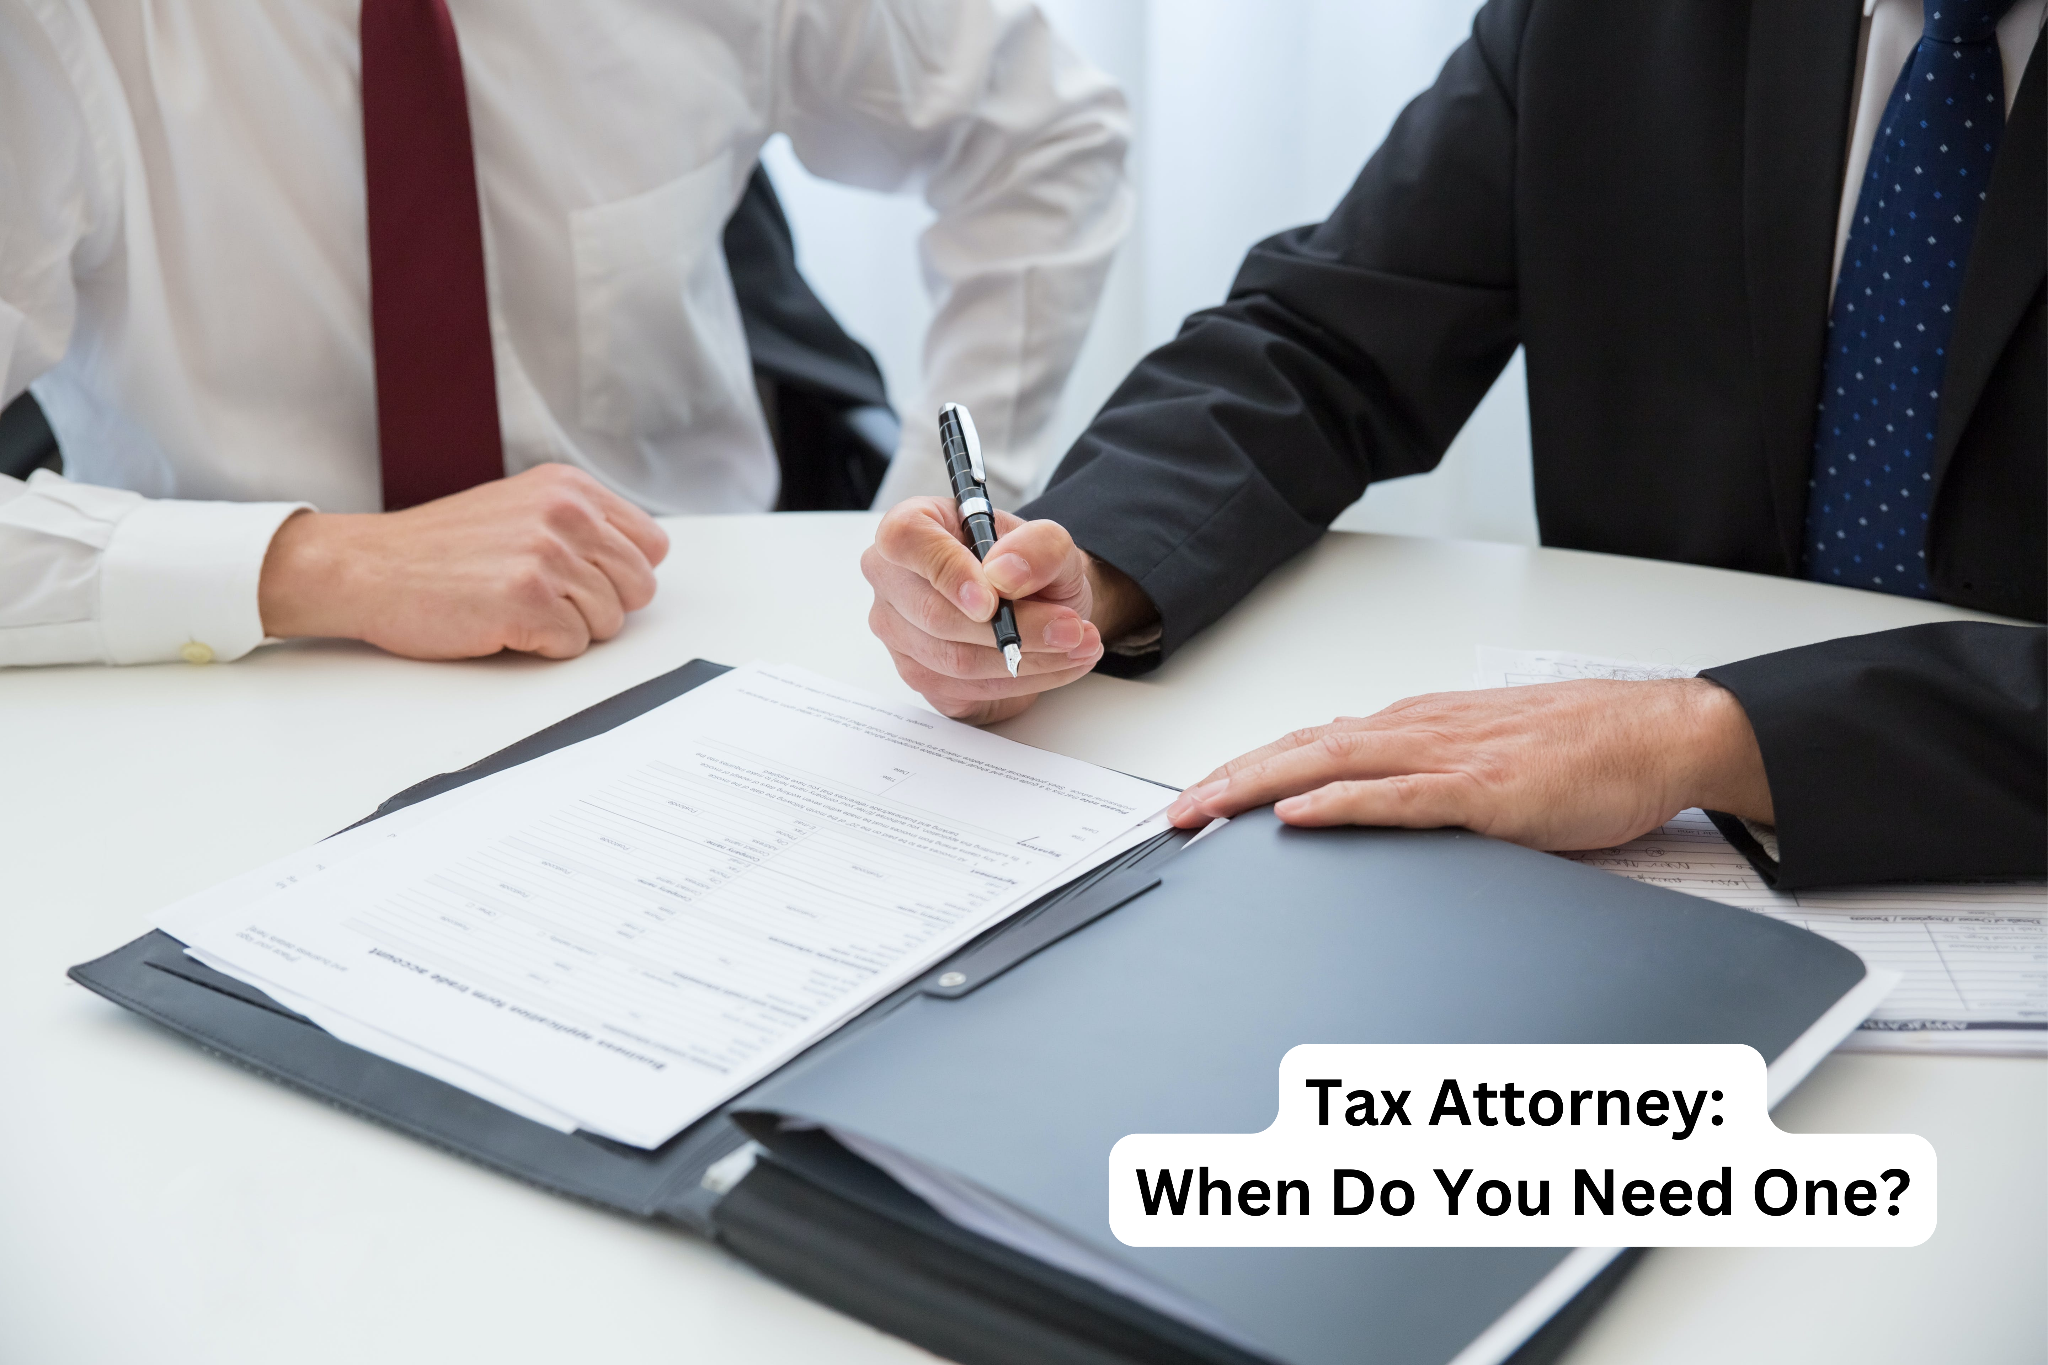 Tax Attorney: When Do You Need One?